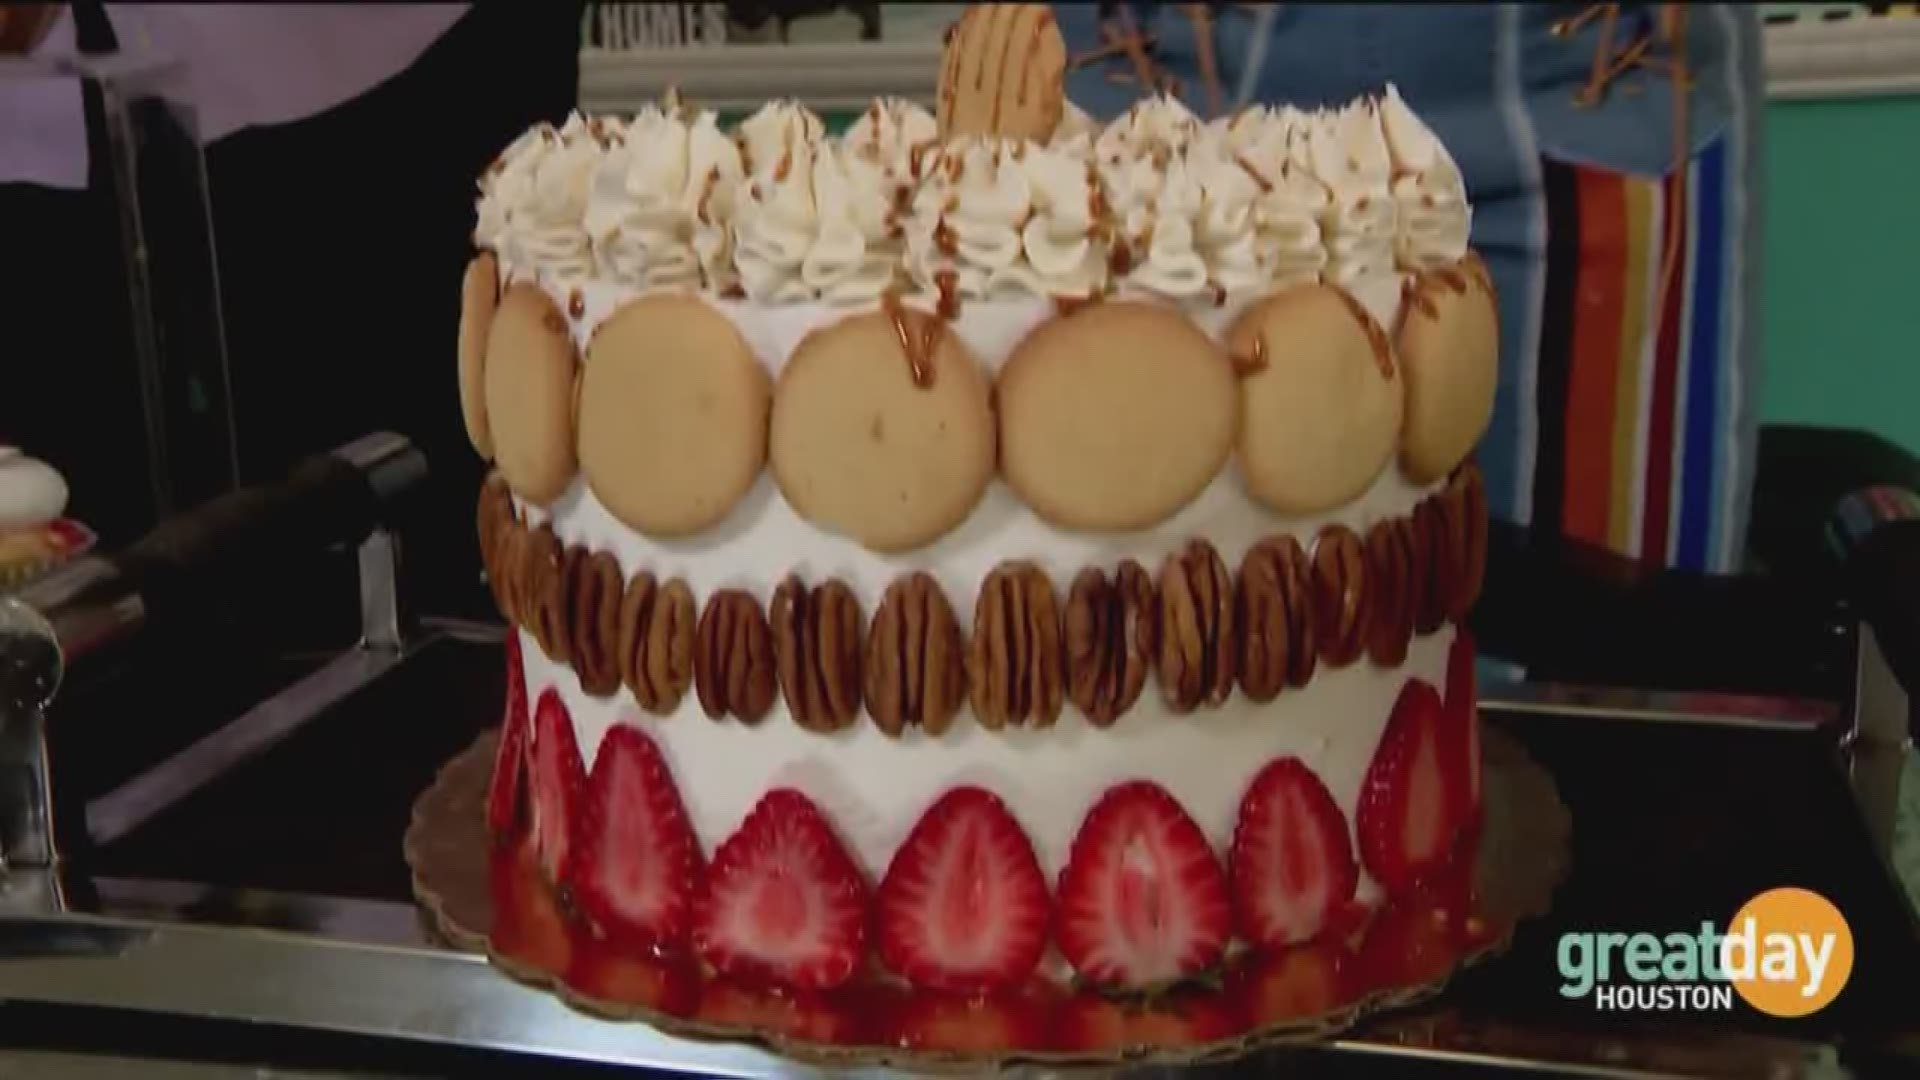 Something called the "Third Ward Classic" dessert caught our attention on Instagram at Cupcake Kitchen.  Great Day Houston's Cristina Kooker showed up hungry and ready to dig into this cake that has three desserts in one and of course hear the story of wh